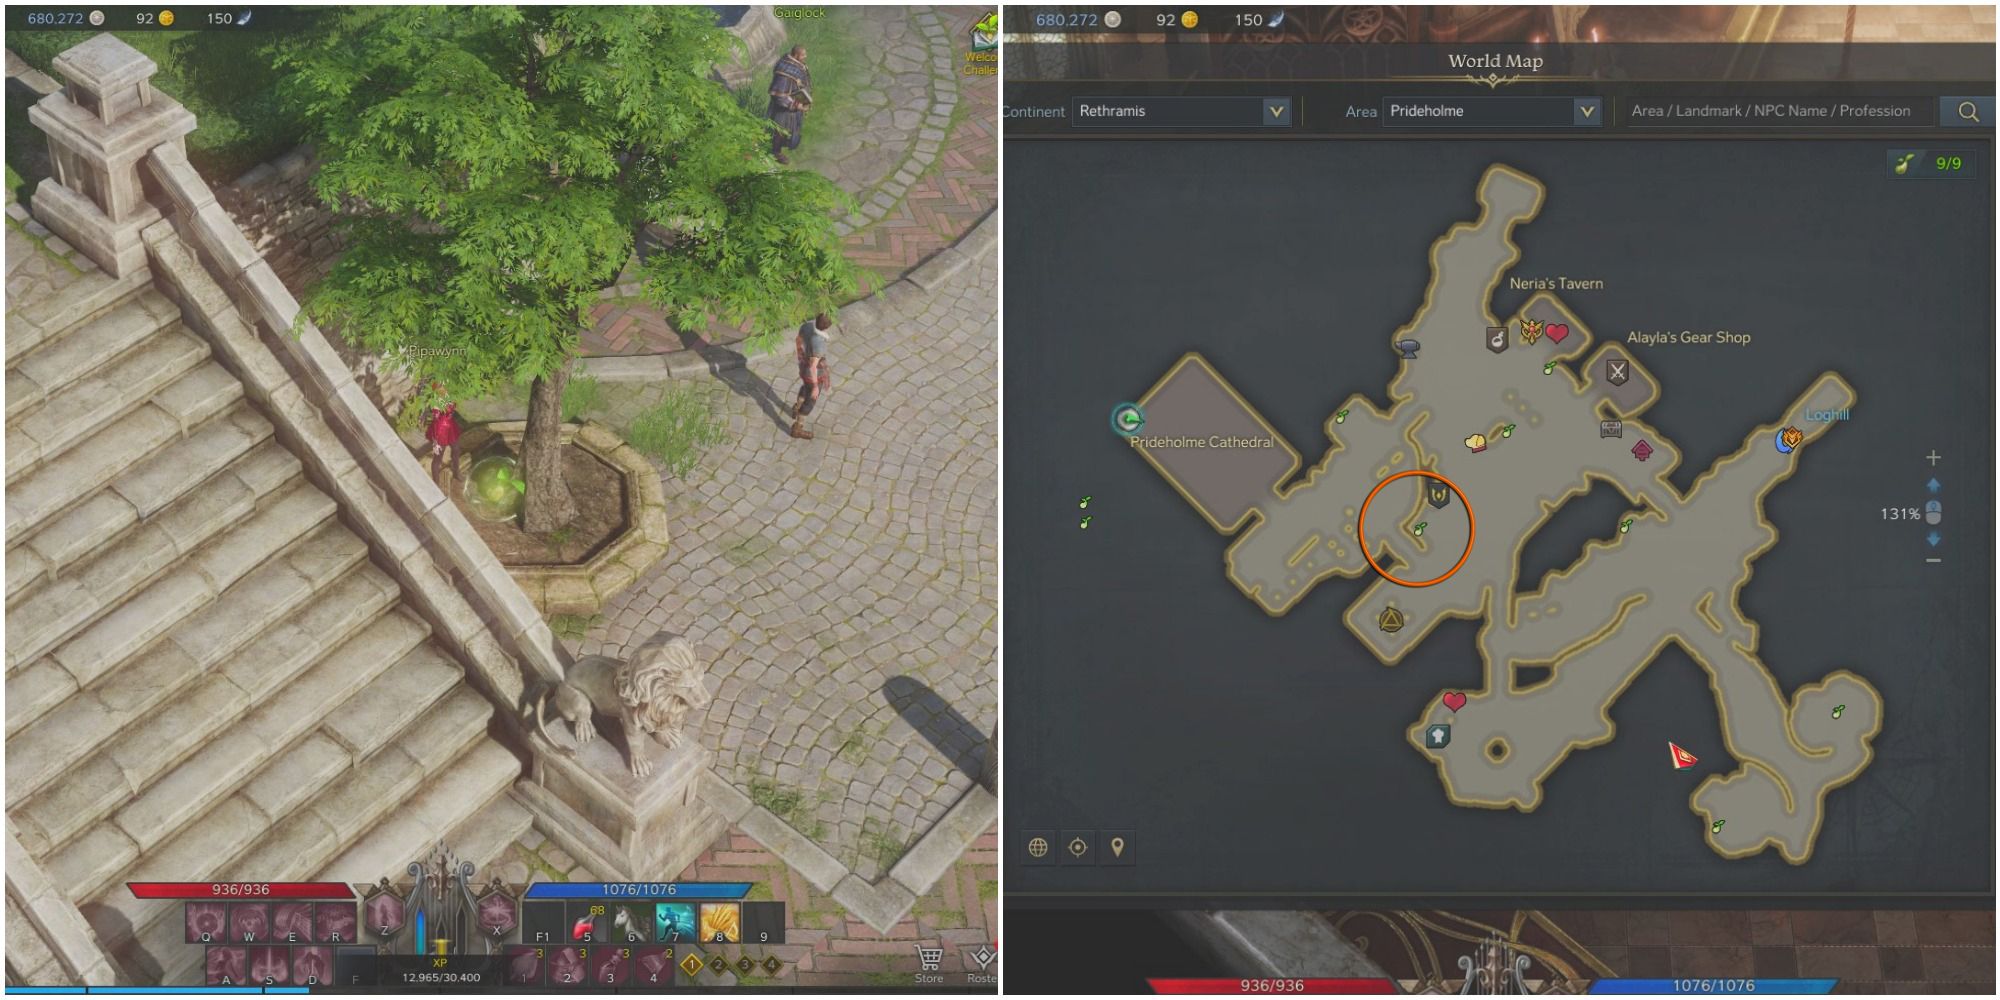 Split image of a bard standing next to a mokoko seed between a marble staircase and planted tree, and a map of Prideholme